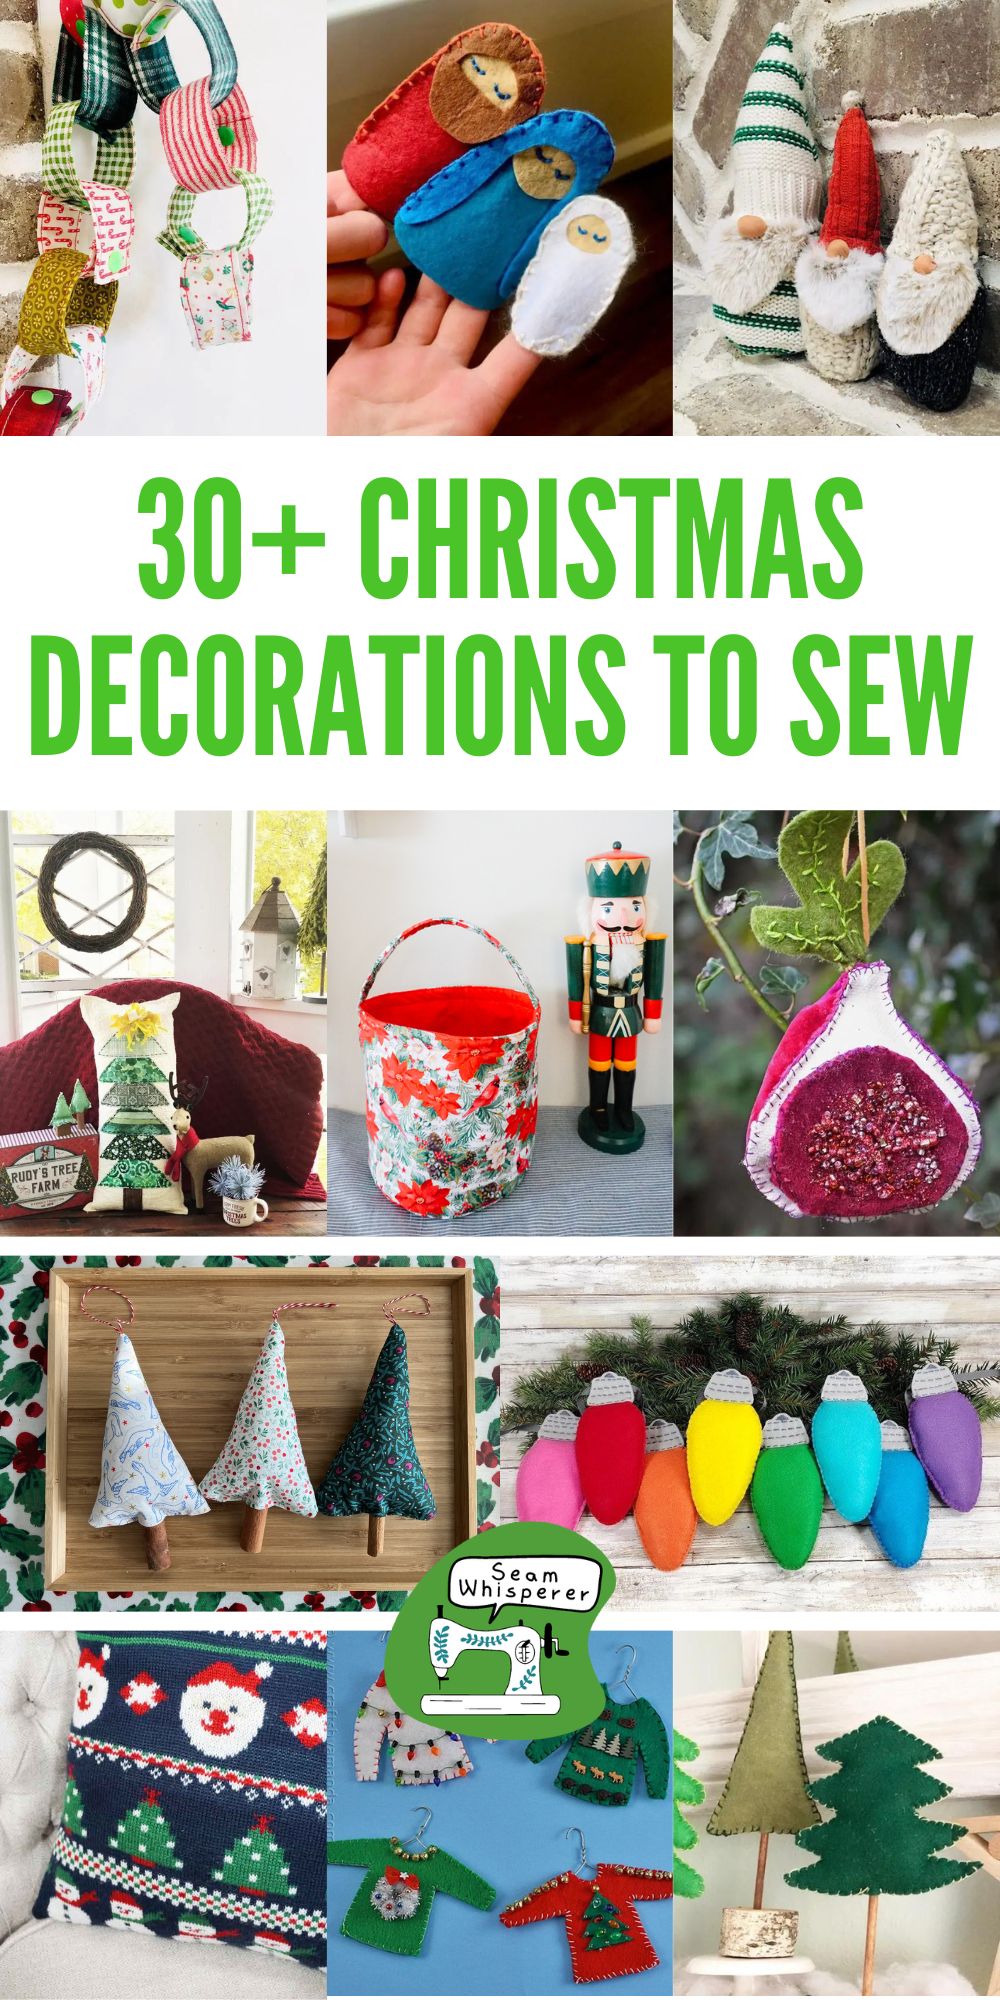 Fabric Christmas Tree Decoration - The Sewing Directory